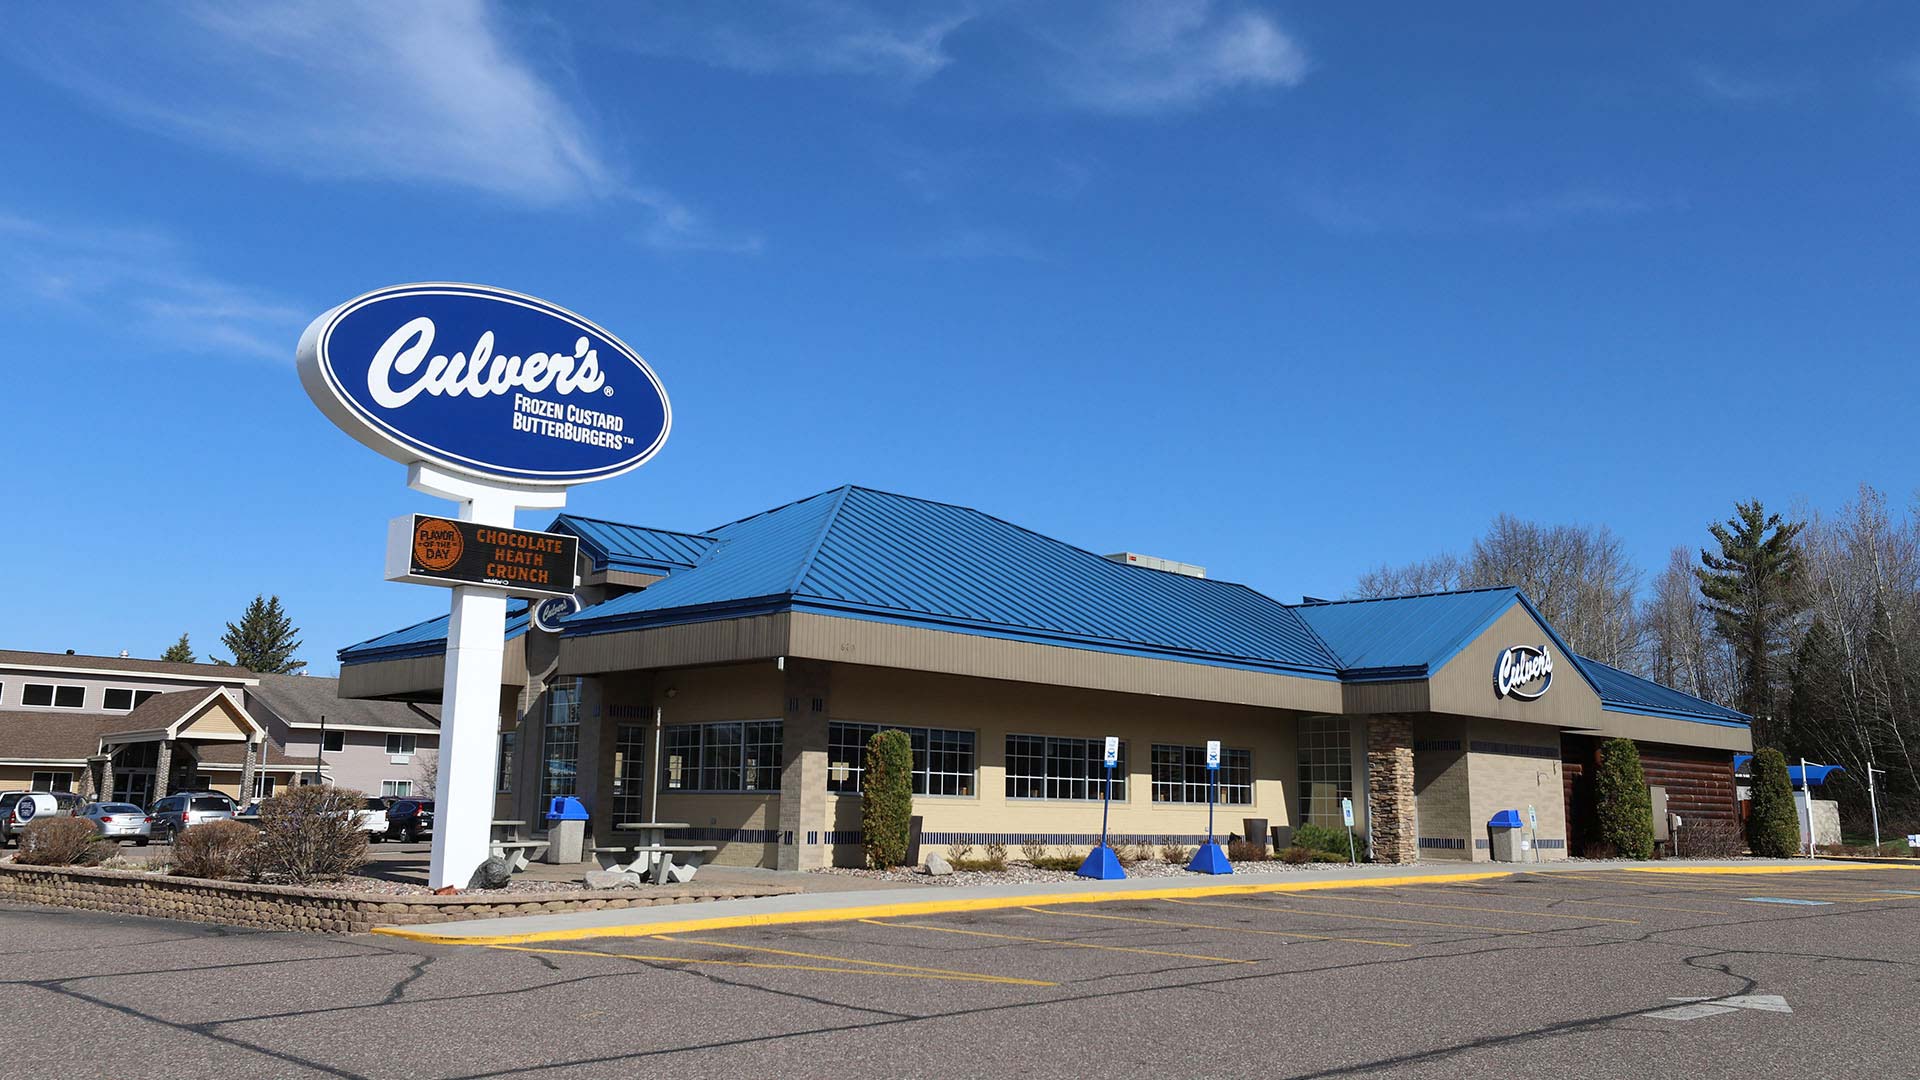 Exterior of Culvers with sign